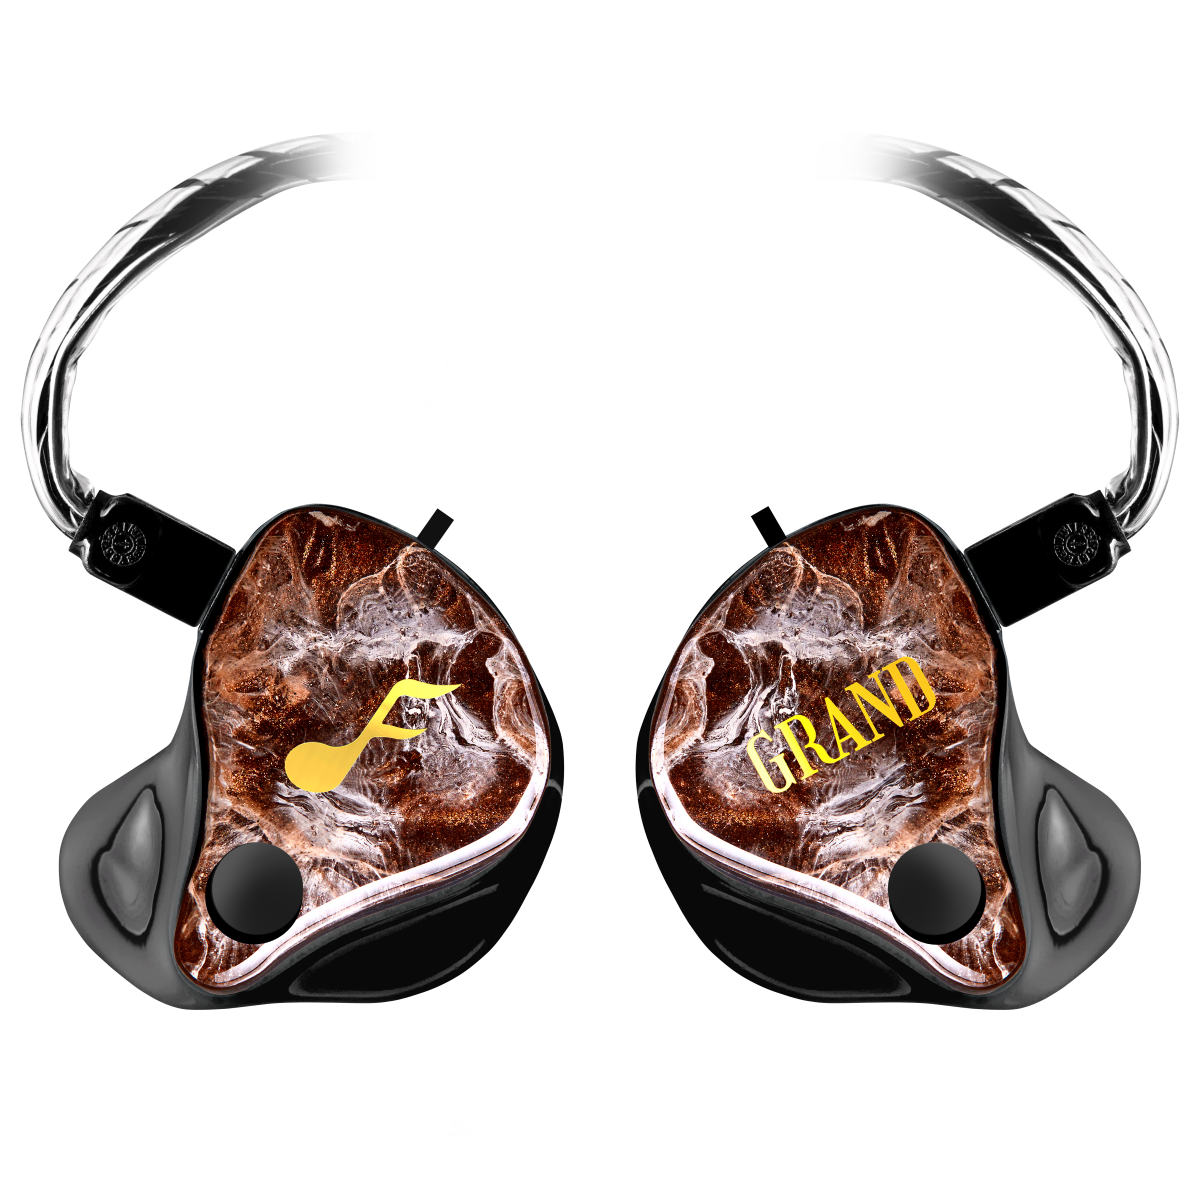 GRAND Maestro Custom IEM - Prices from 5296.00 to 5390.00